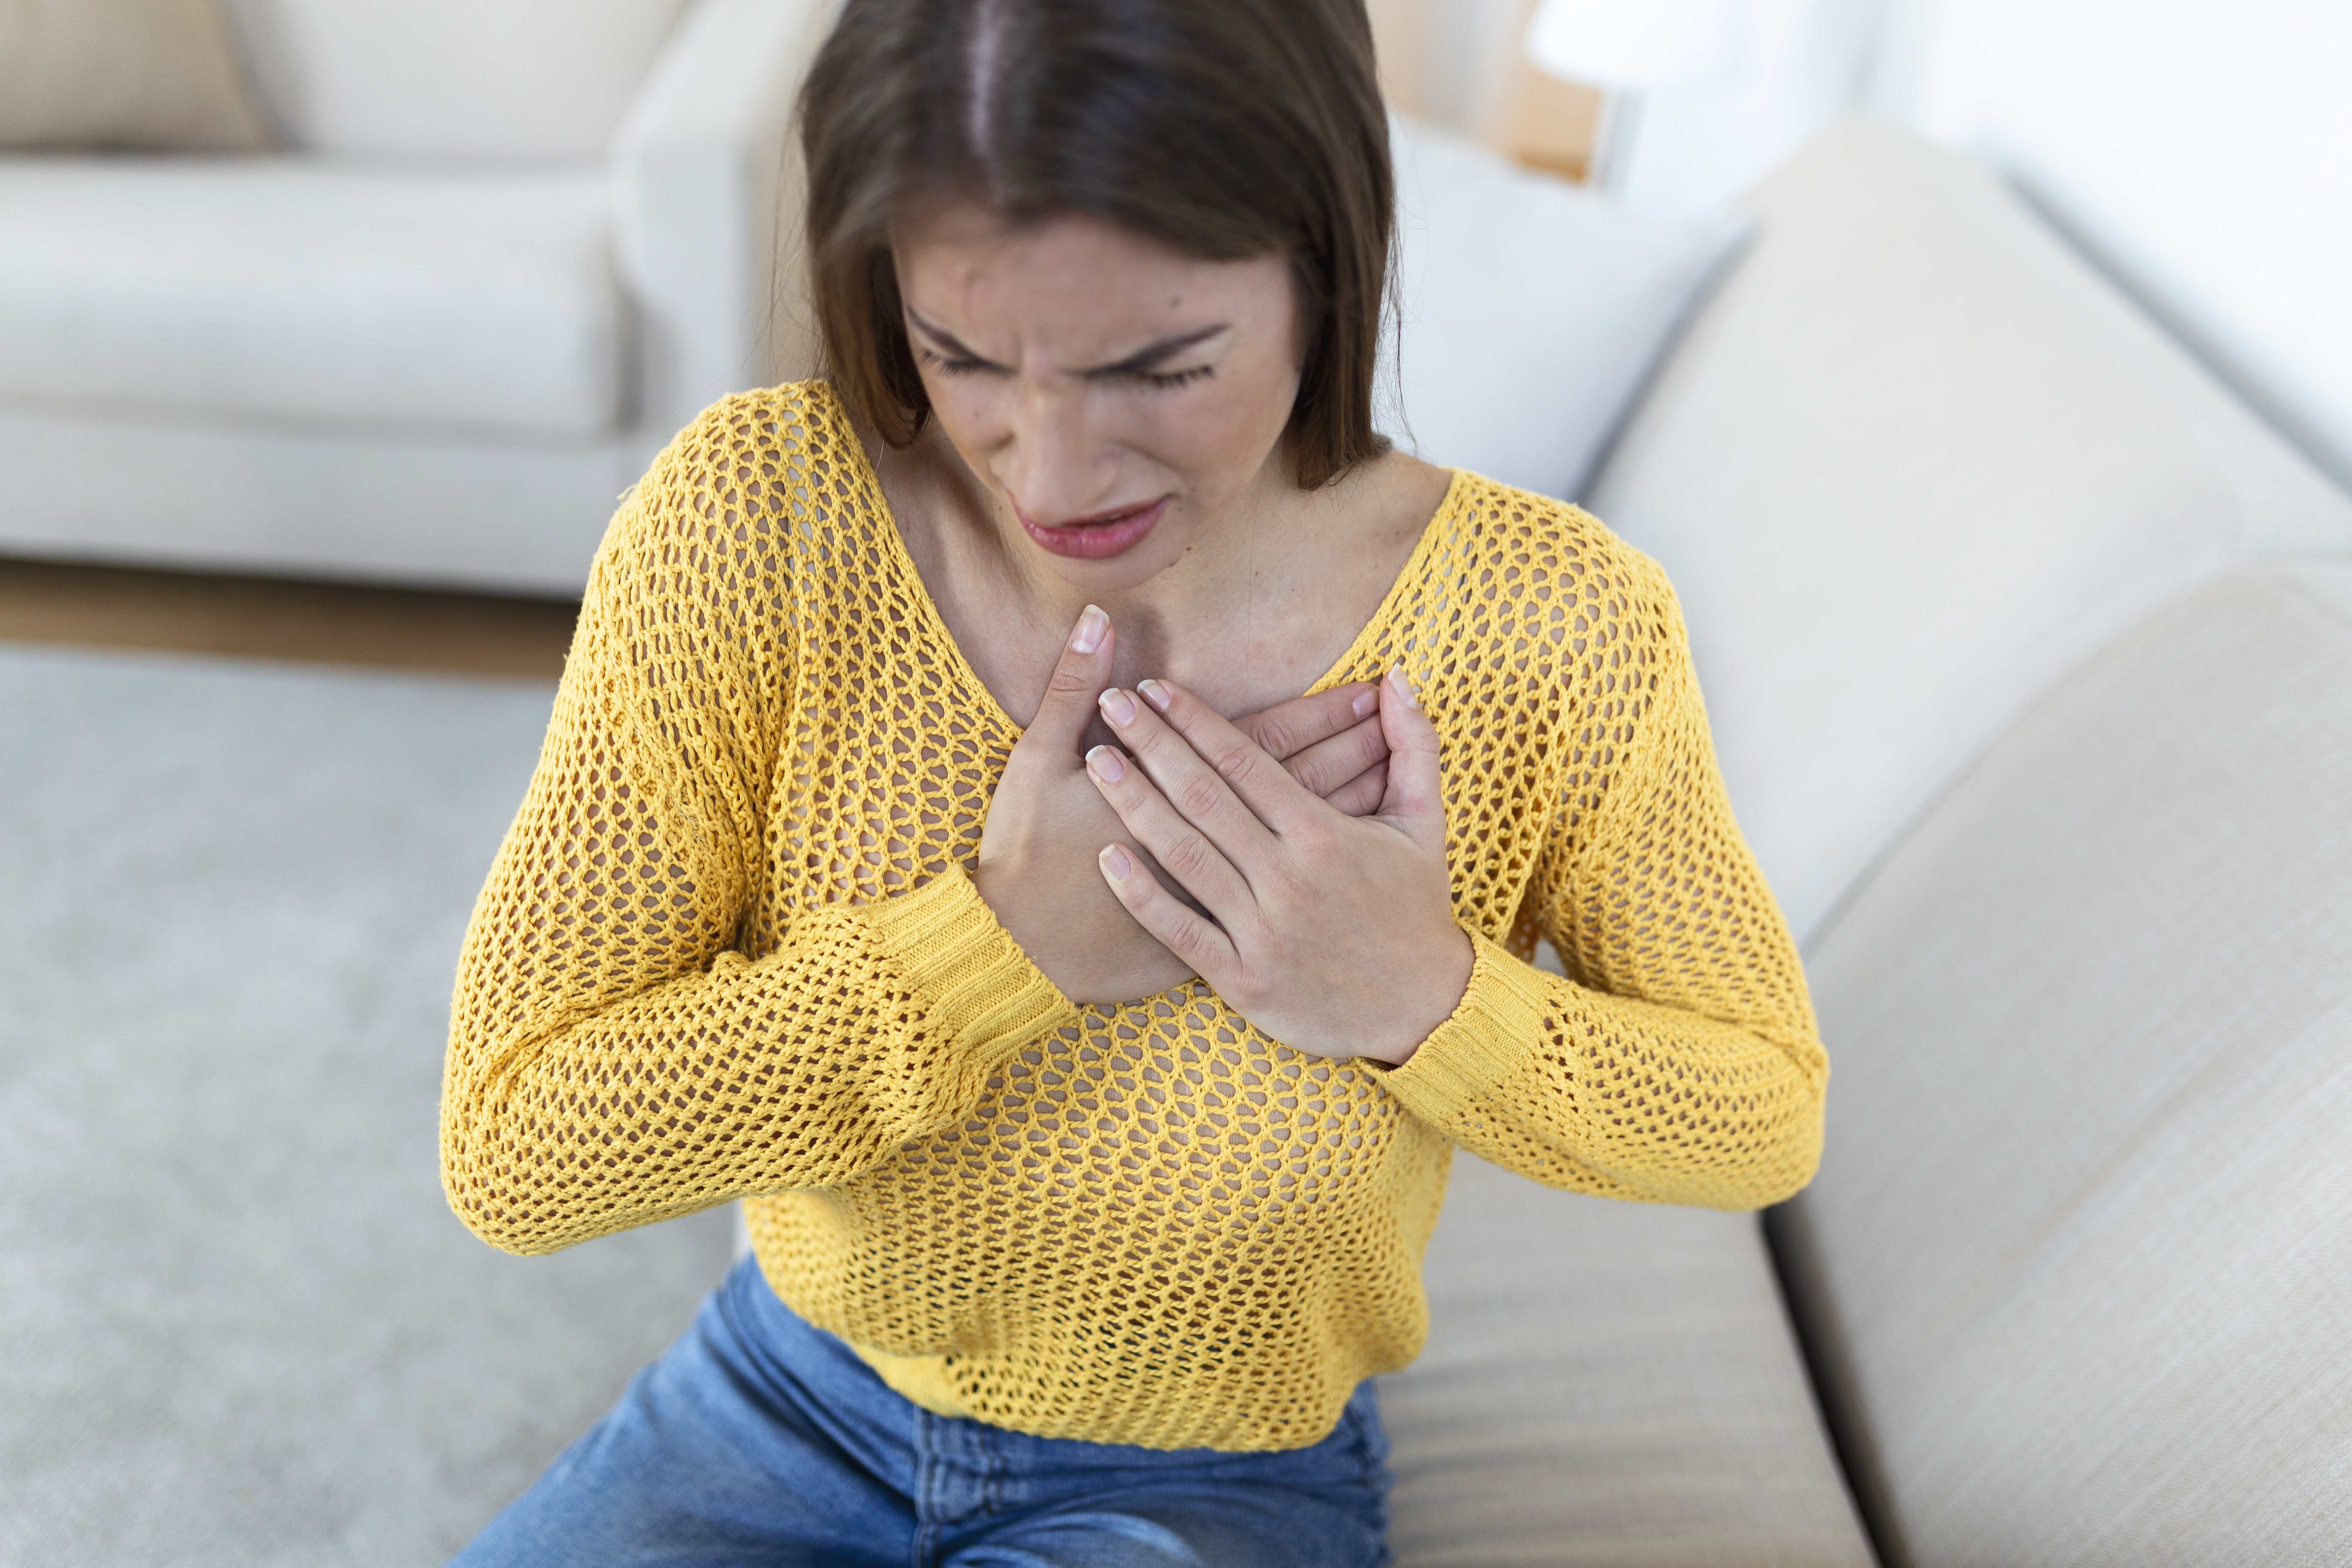 The symptoms of a heart attack in women are different from those in men.